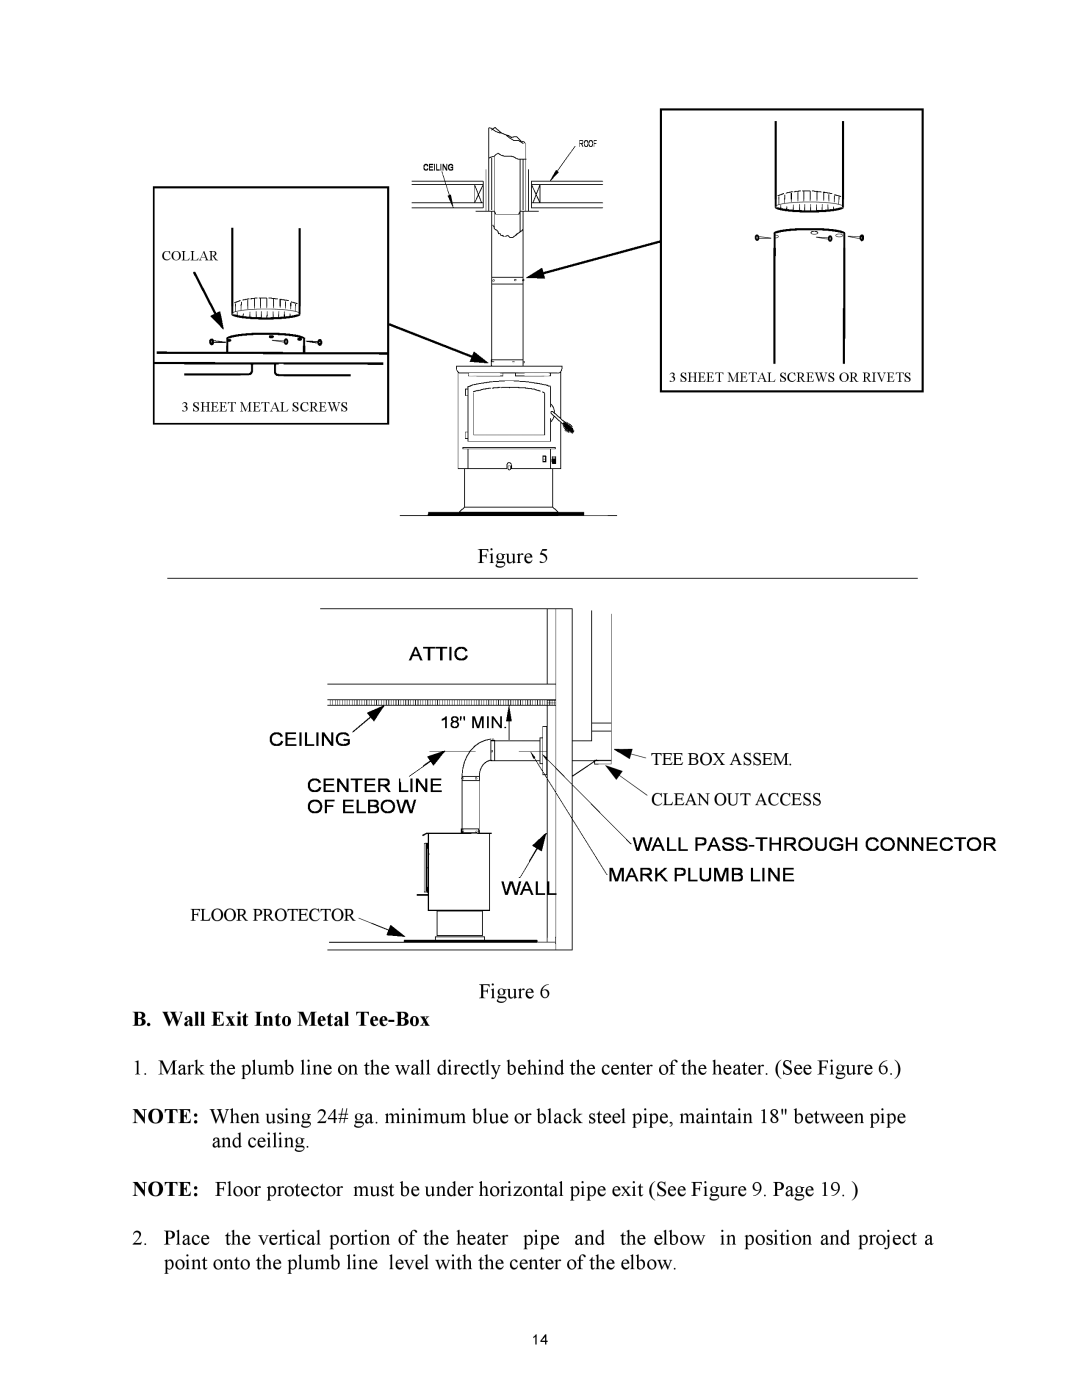 New Buck Corporation 74 installation instructions B. Wall Exit Into Metal Tee-Box 